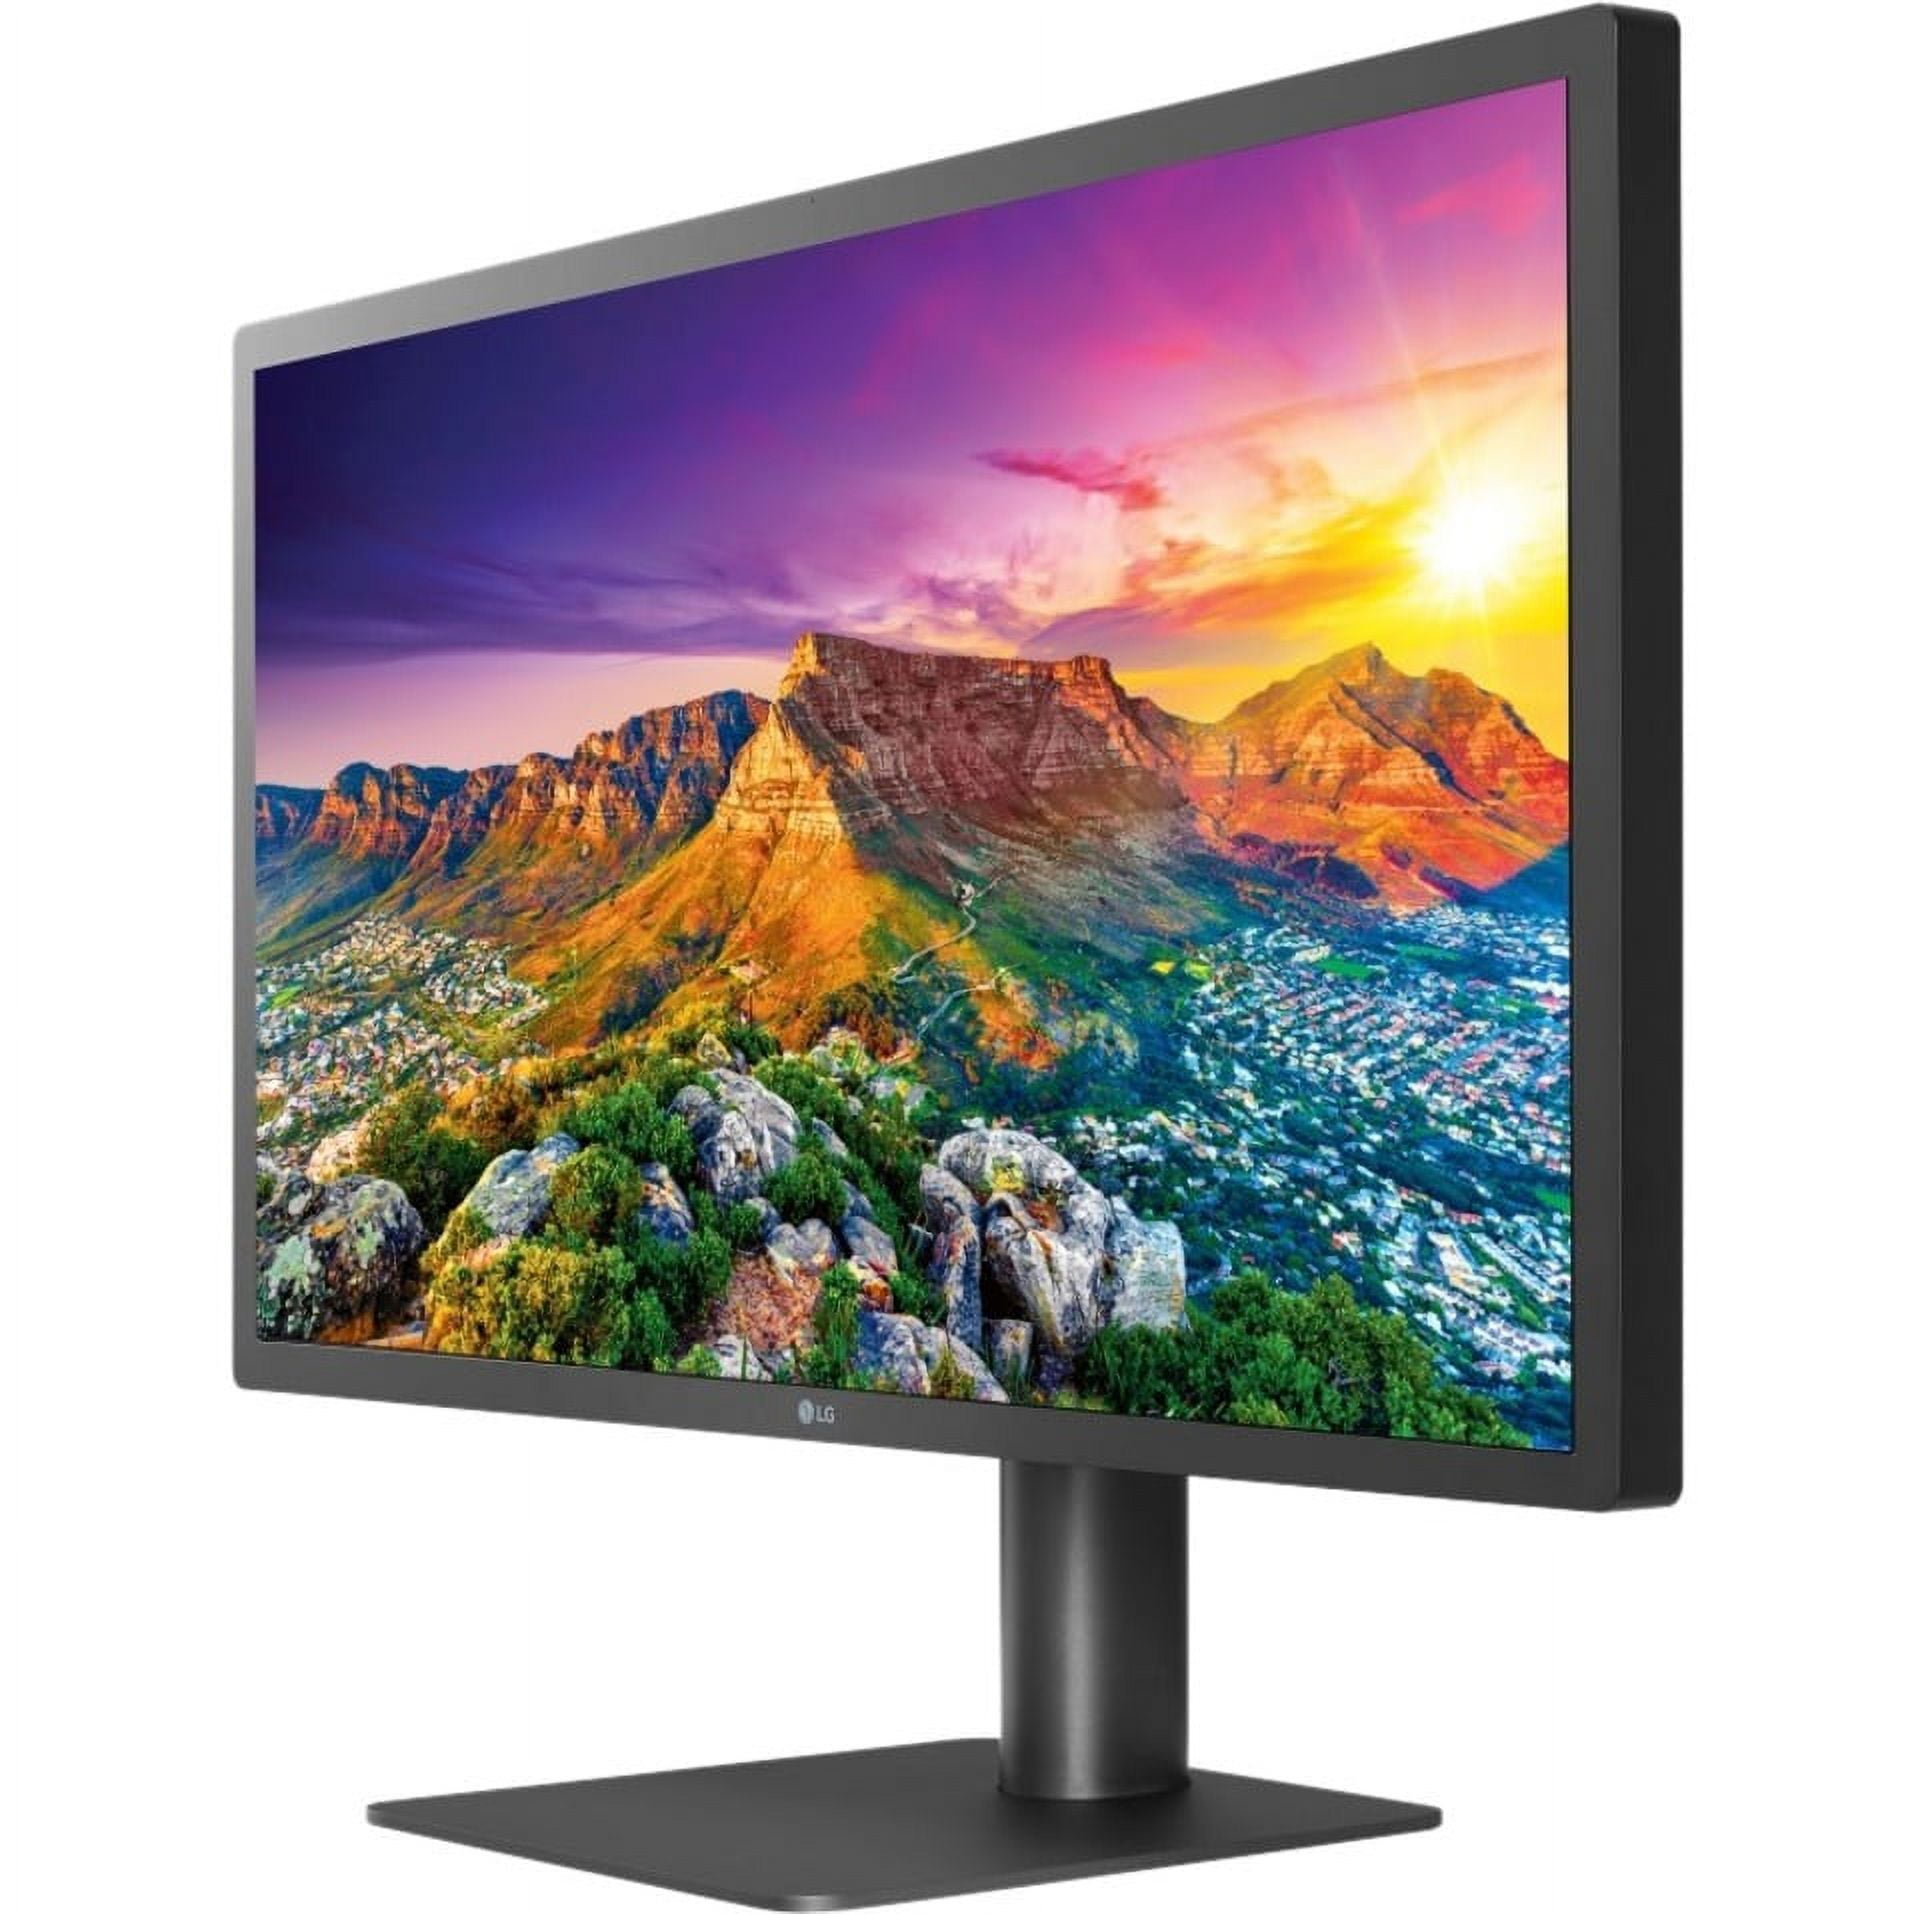 LG Ultrafine 24MD4KL-B 24-Inch 16:9 4K IPS Monitor - macOS Compatibility  with USB Type-C Cable, Thunderbolt 3 Cable, LCD Cleaning Kit and  Electronics